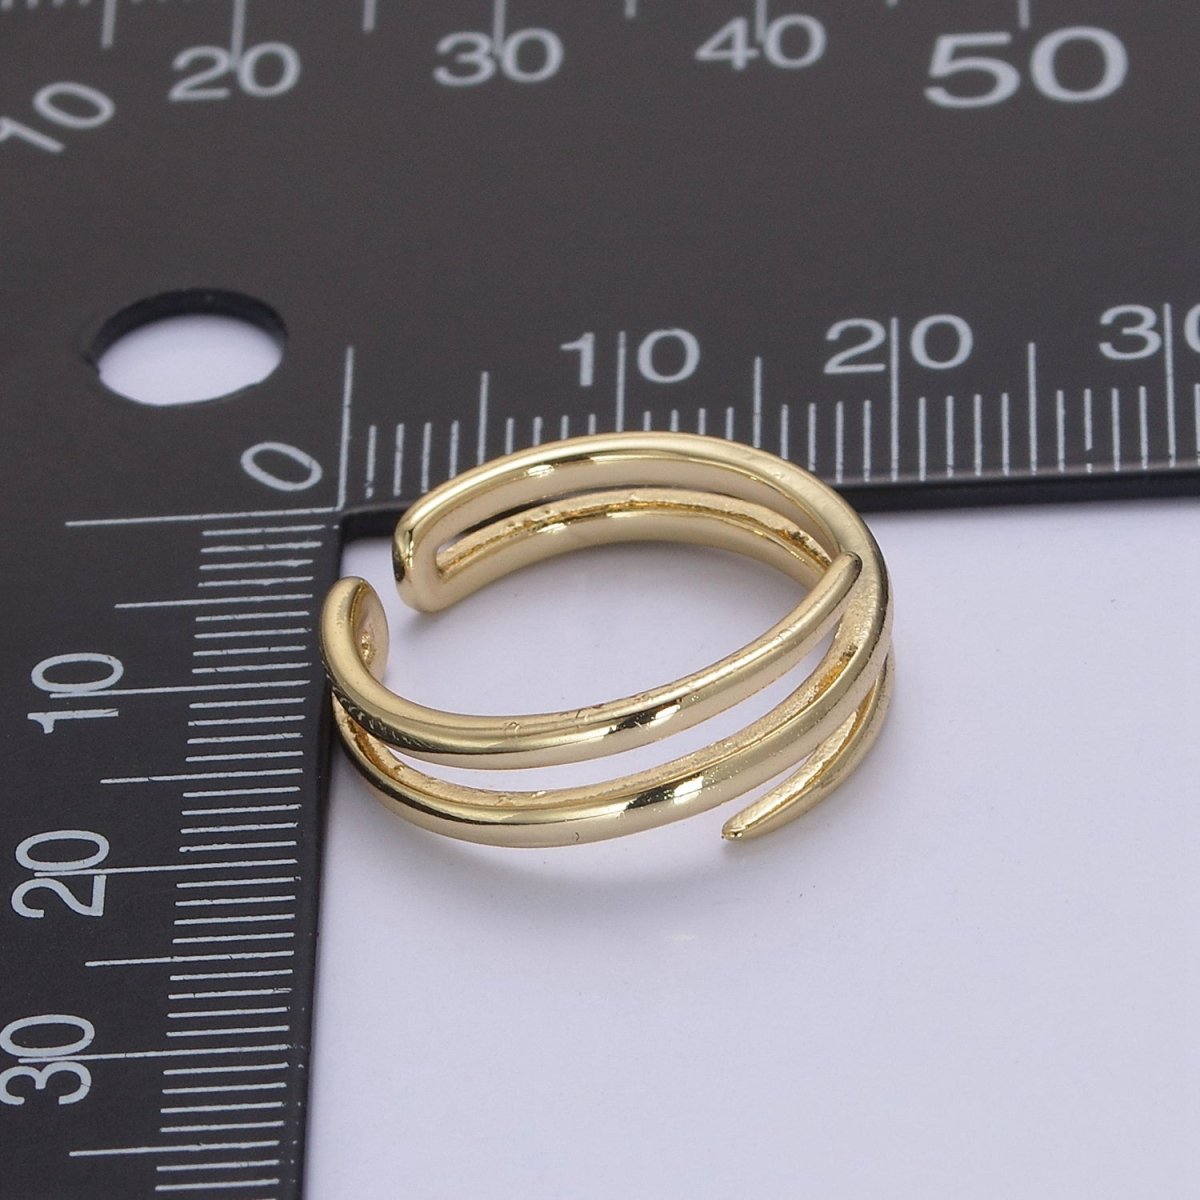 OS 24K Gold Filled Double Band Ring, Minimalist Three Layer Line Adjustable Open Gold Ring S-340 - DLUXCA